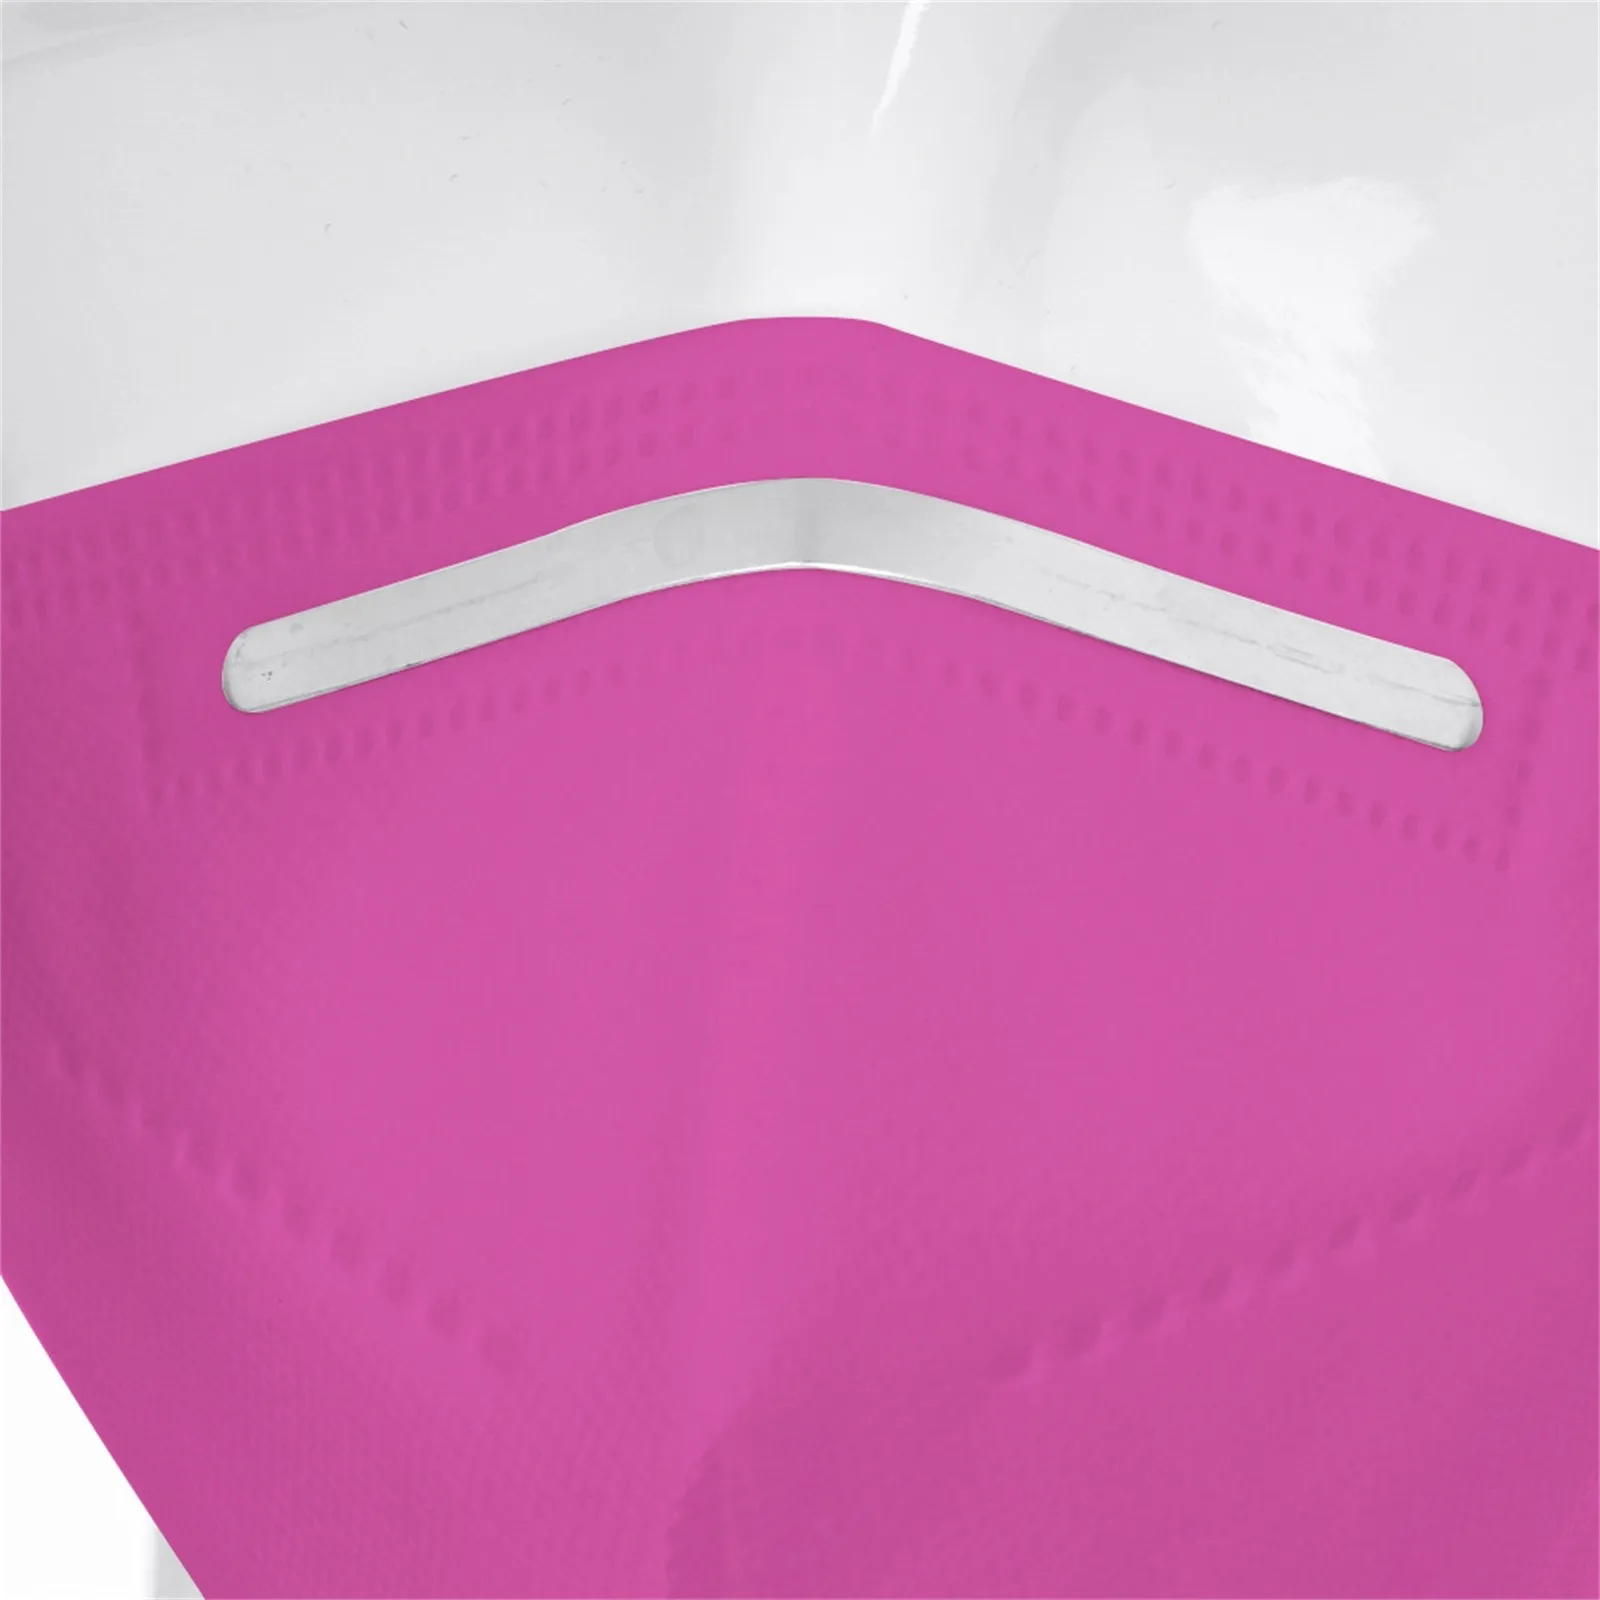 

Headband mascarillas 20/25/50/100PCS 5-Layer High-Density Mask PM2.5 Wind And Mist Pollution Protection Filter